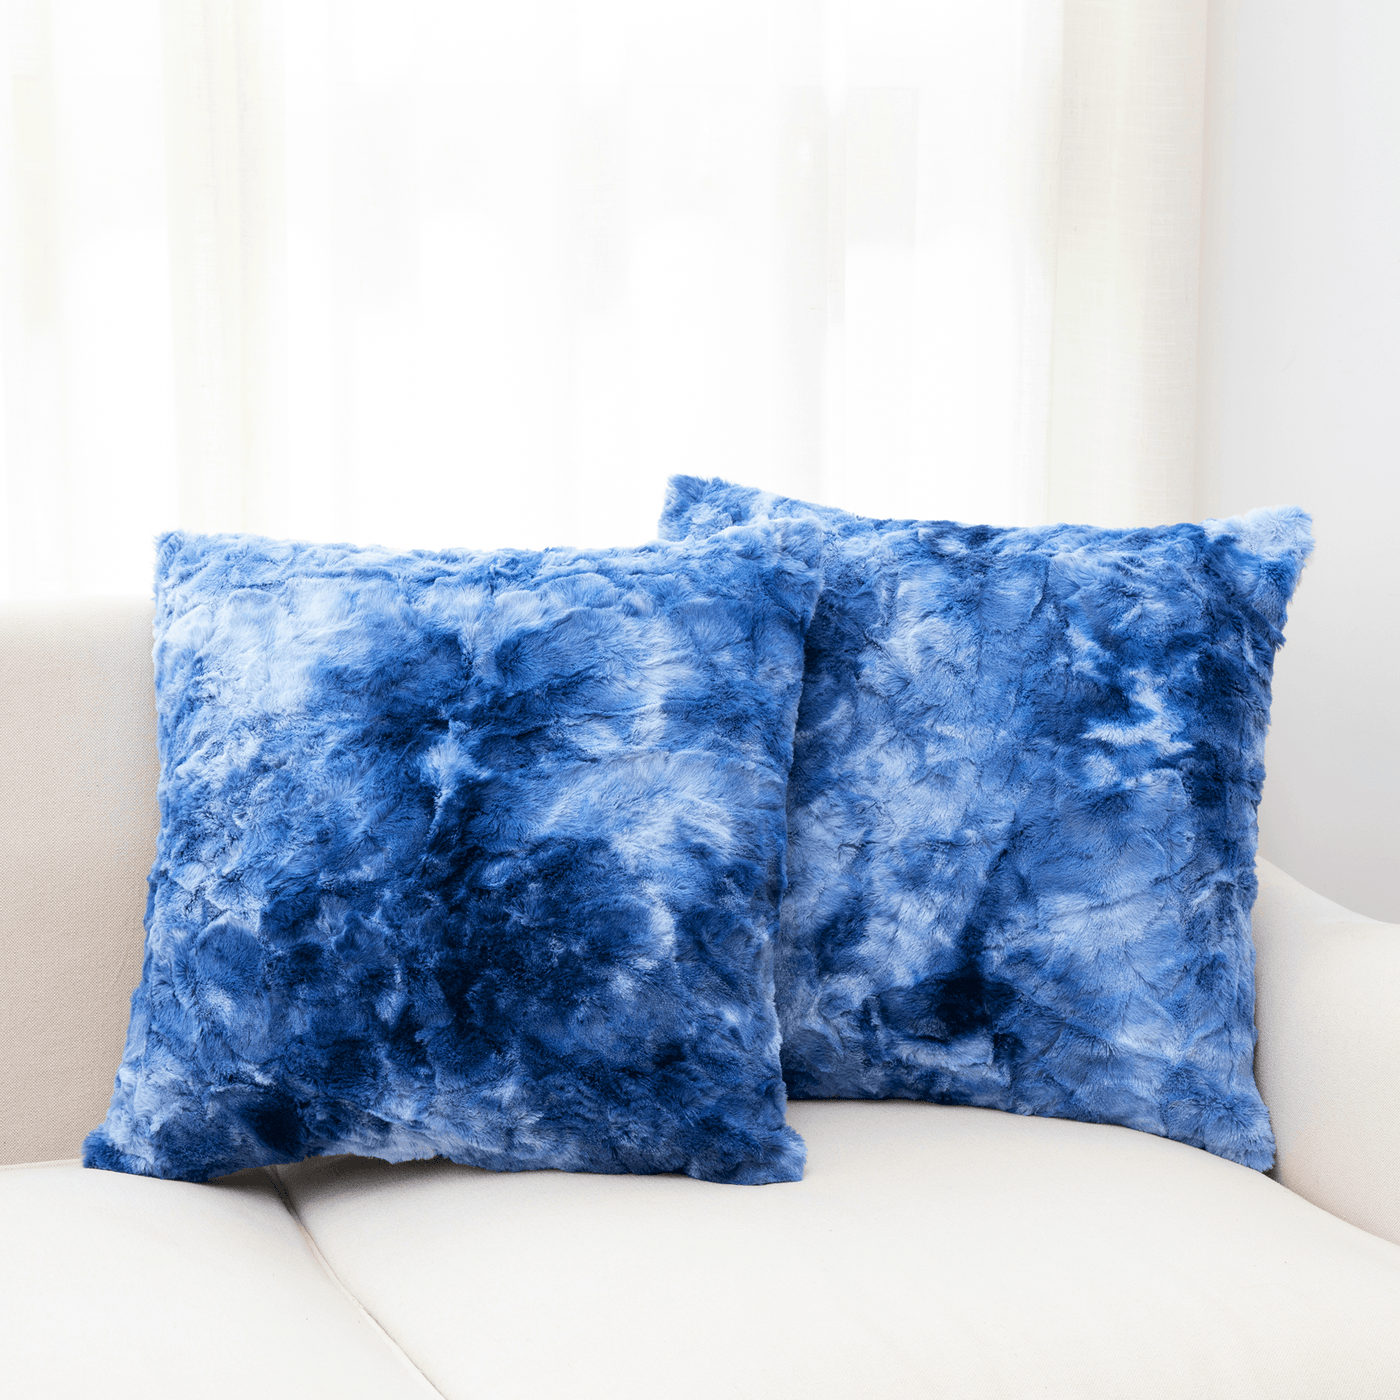 Cheer Collection Set of 2 Embossed Faux Fur Throw Pillows 22 x 22 